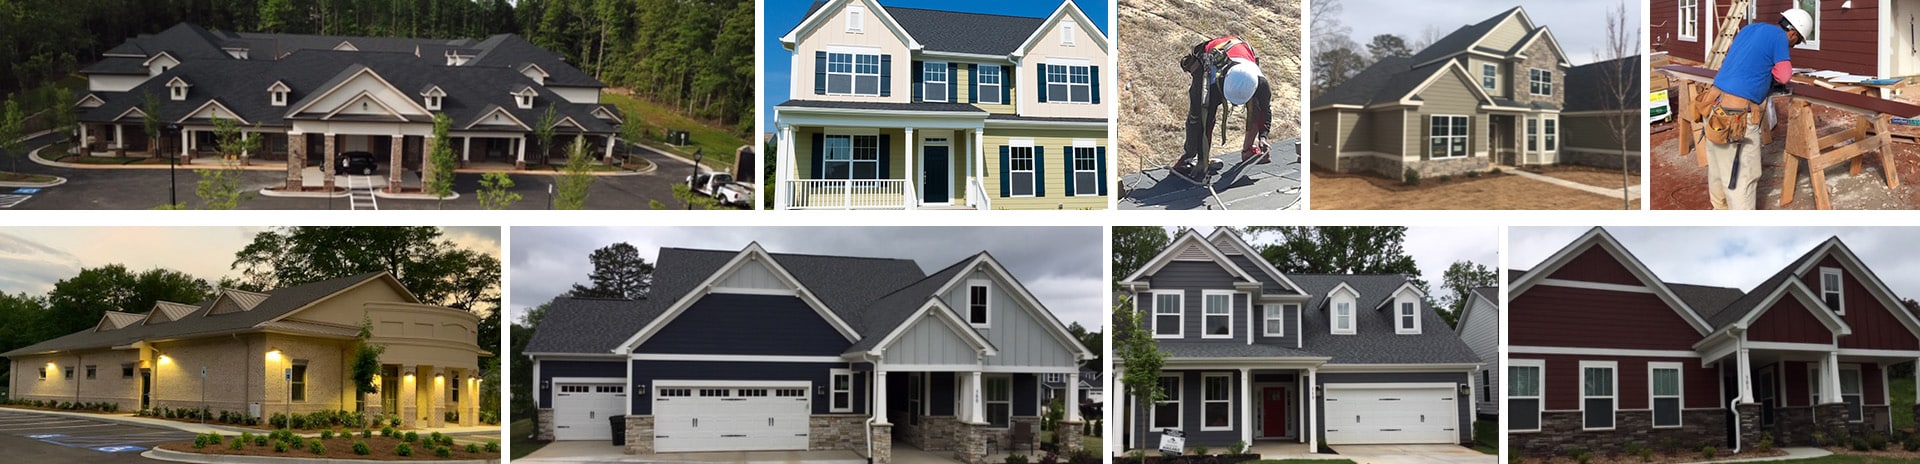 North Carolina Siding, Gutters, Roofing, Windows, Screened in Porches